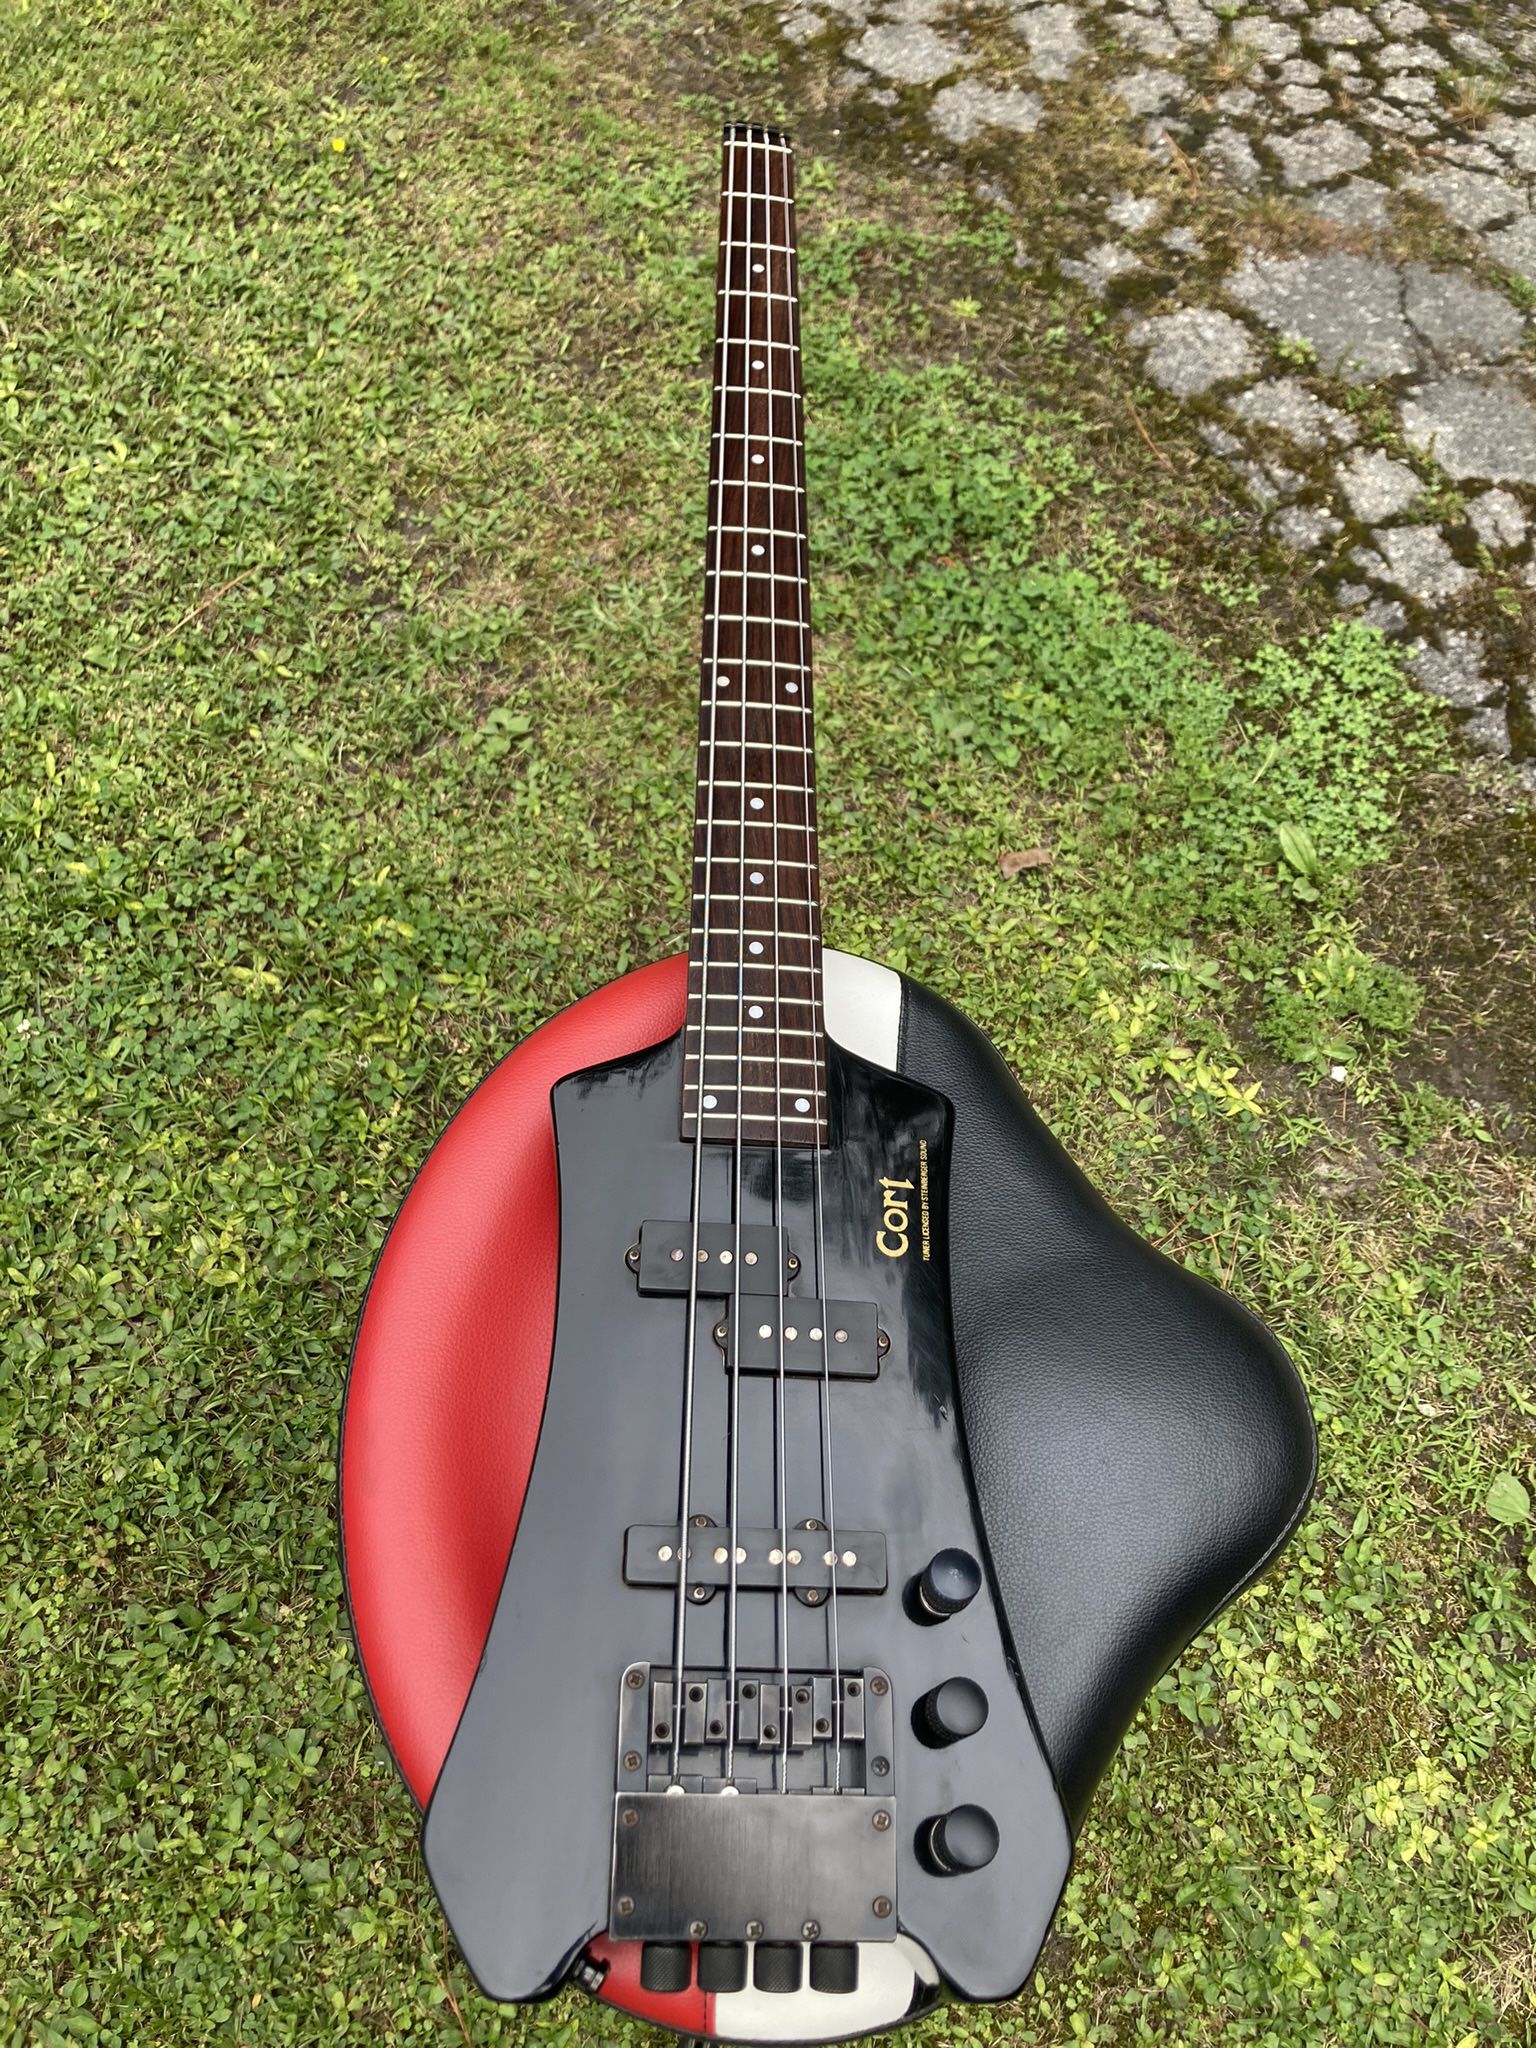 Cort Space B2 Steinberger 80’s Headless Bass Guitar Plays & Sounds Good! Shipping is available or Free pickup at Kempsville library in Virginia Beach.